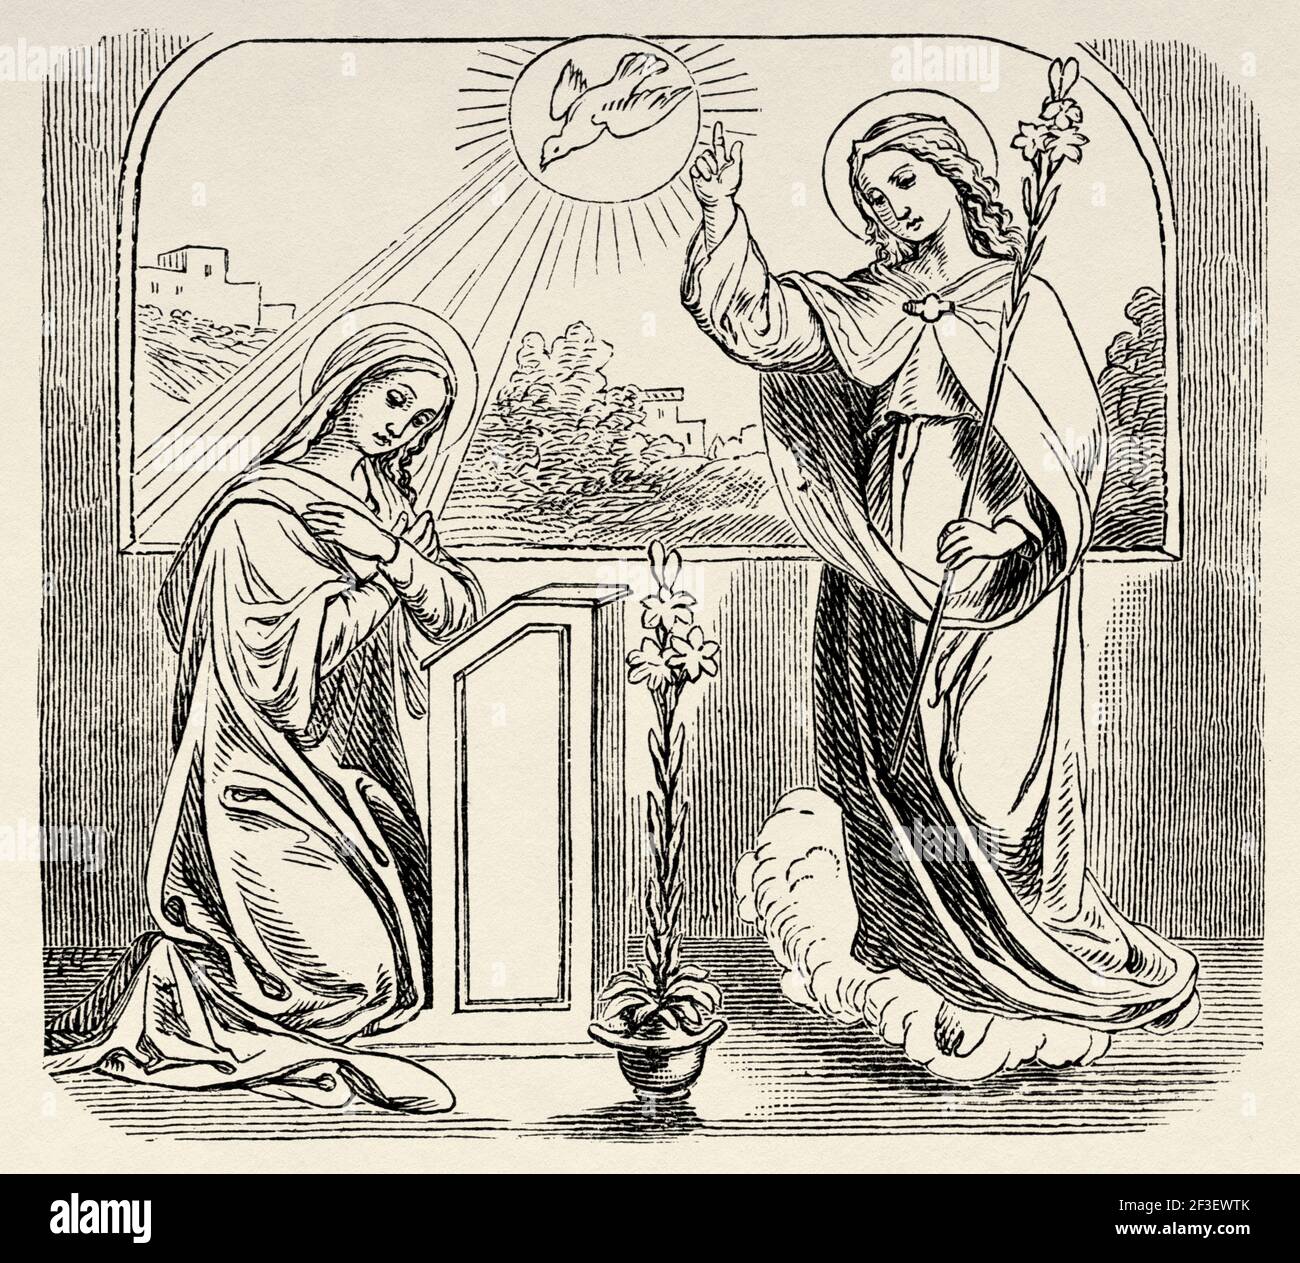 Virgin Mary annunciation. The announcement of the angel Gabriel to the Blessed Virgin Mary. Announcement of the birth of Jesus. The angel Gabriel was sent by God to a city in Galilee called Nazareth. Luke book, New Testament, Old 19th century engraved illustration from History of the Bible 1883 Stock Photo